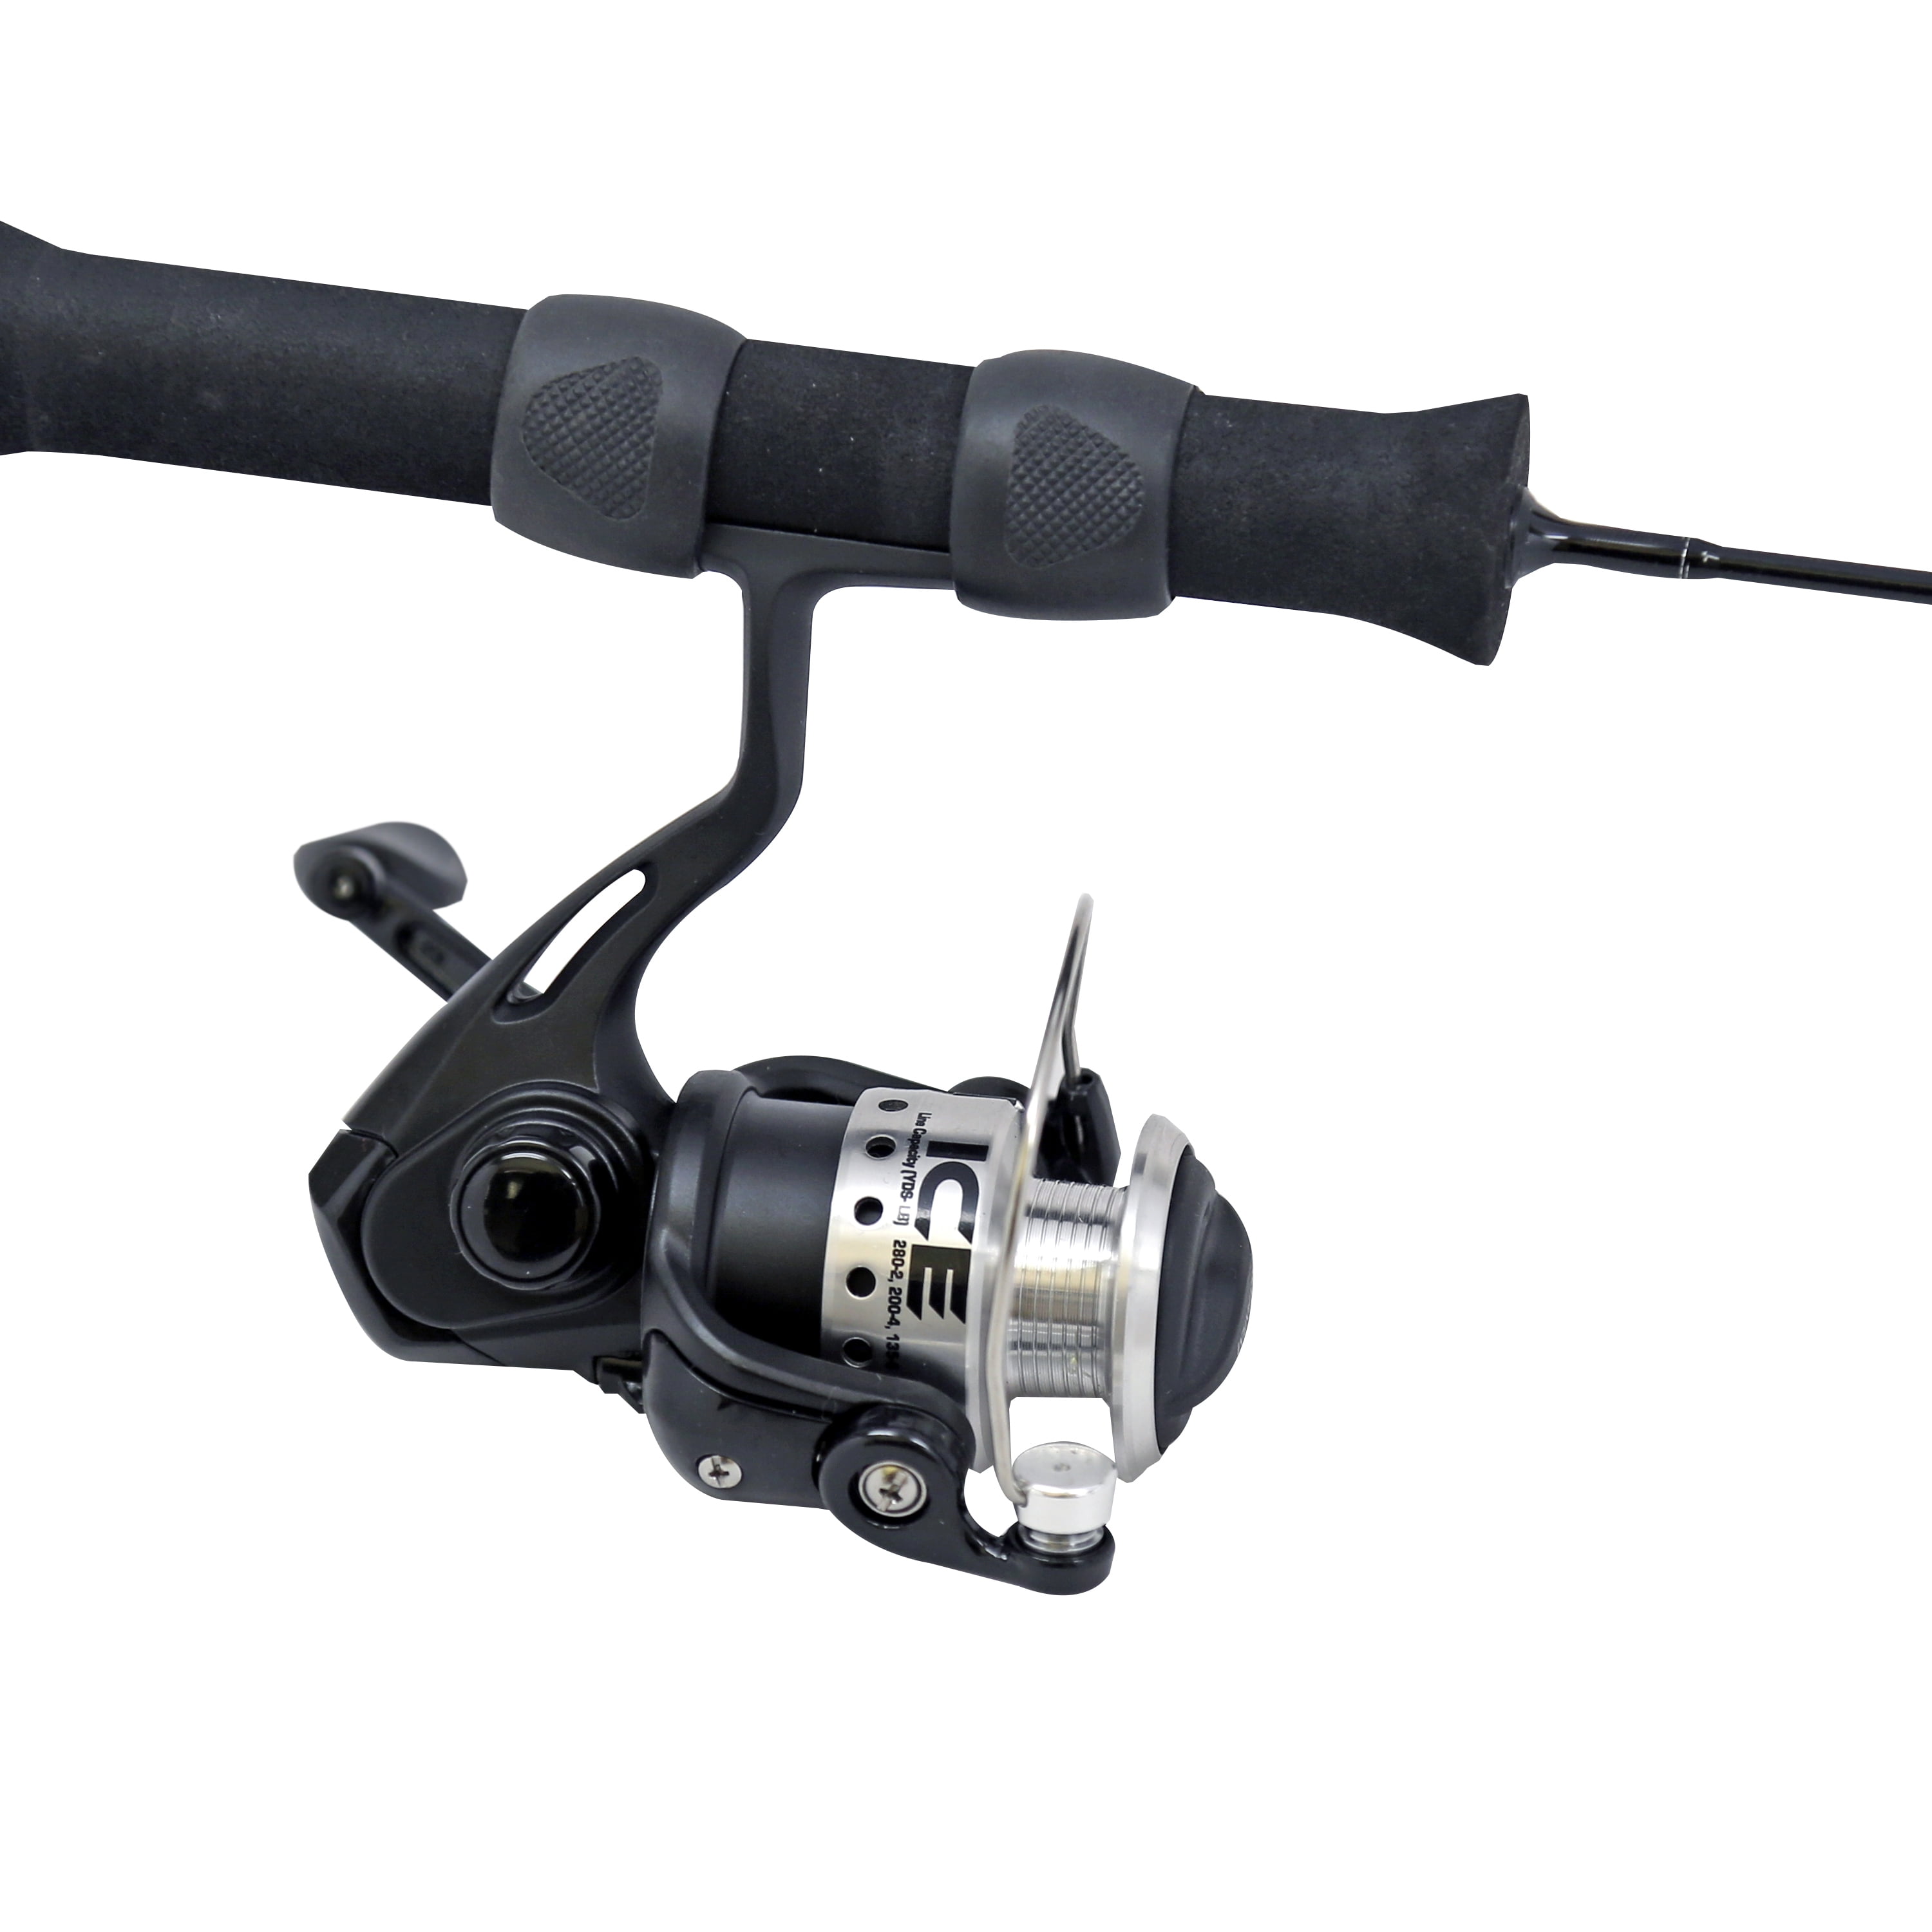 Quantum Ice Spinning Reel and Ice Fishing Rod Combo, Black